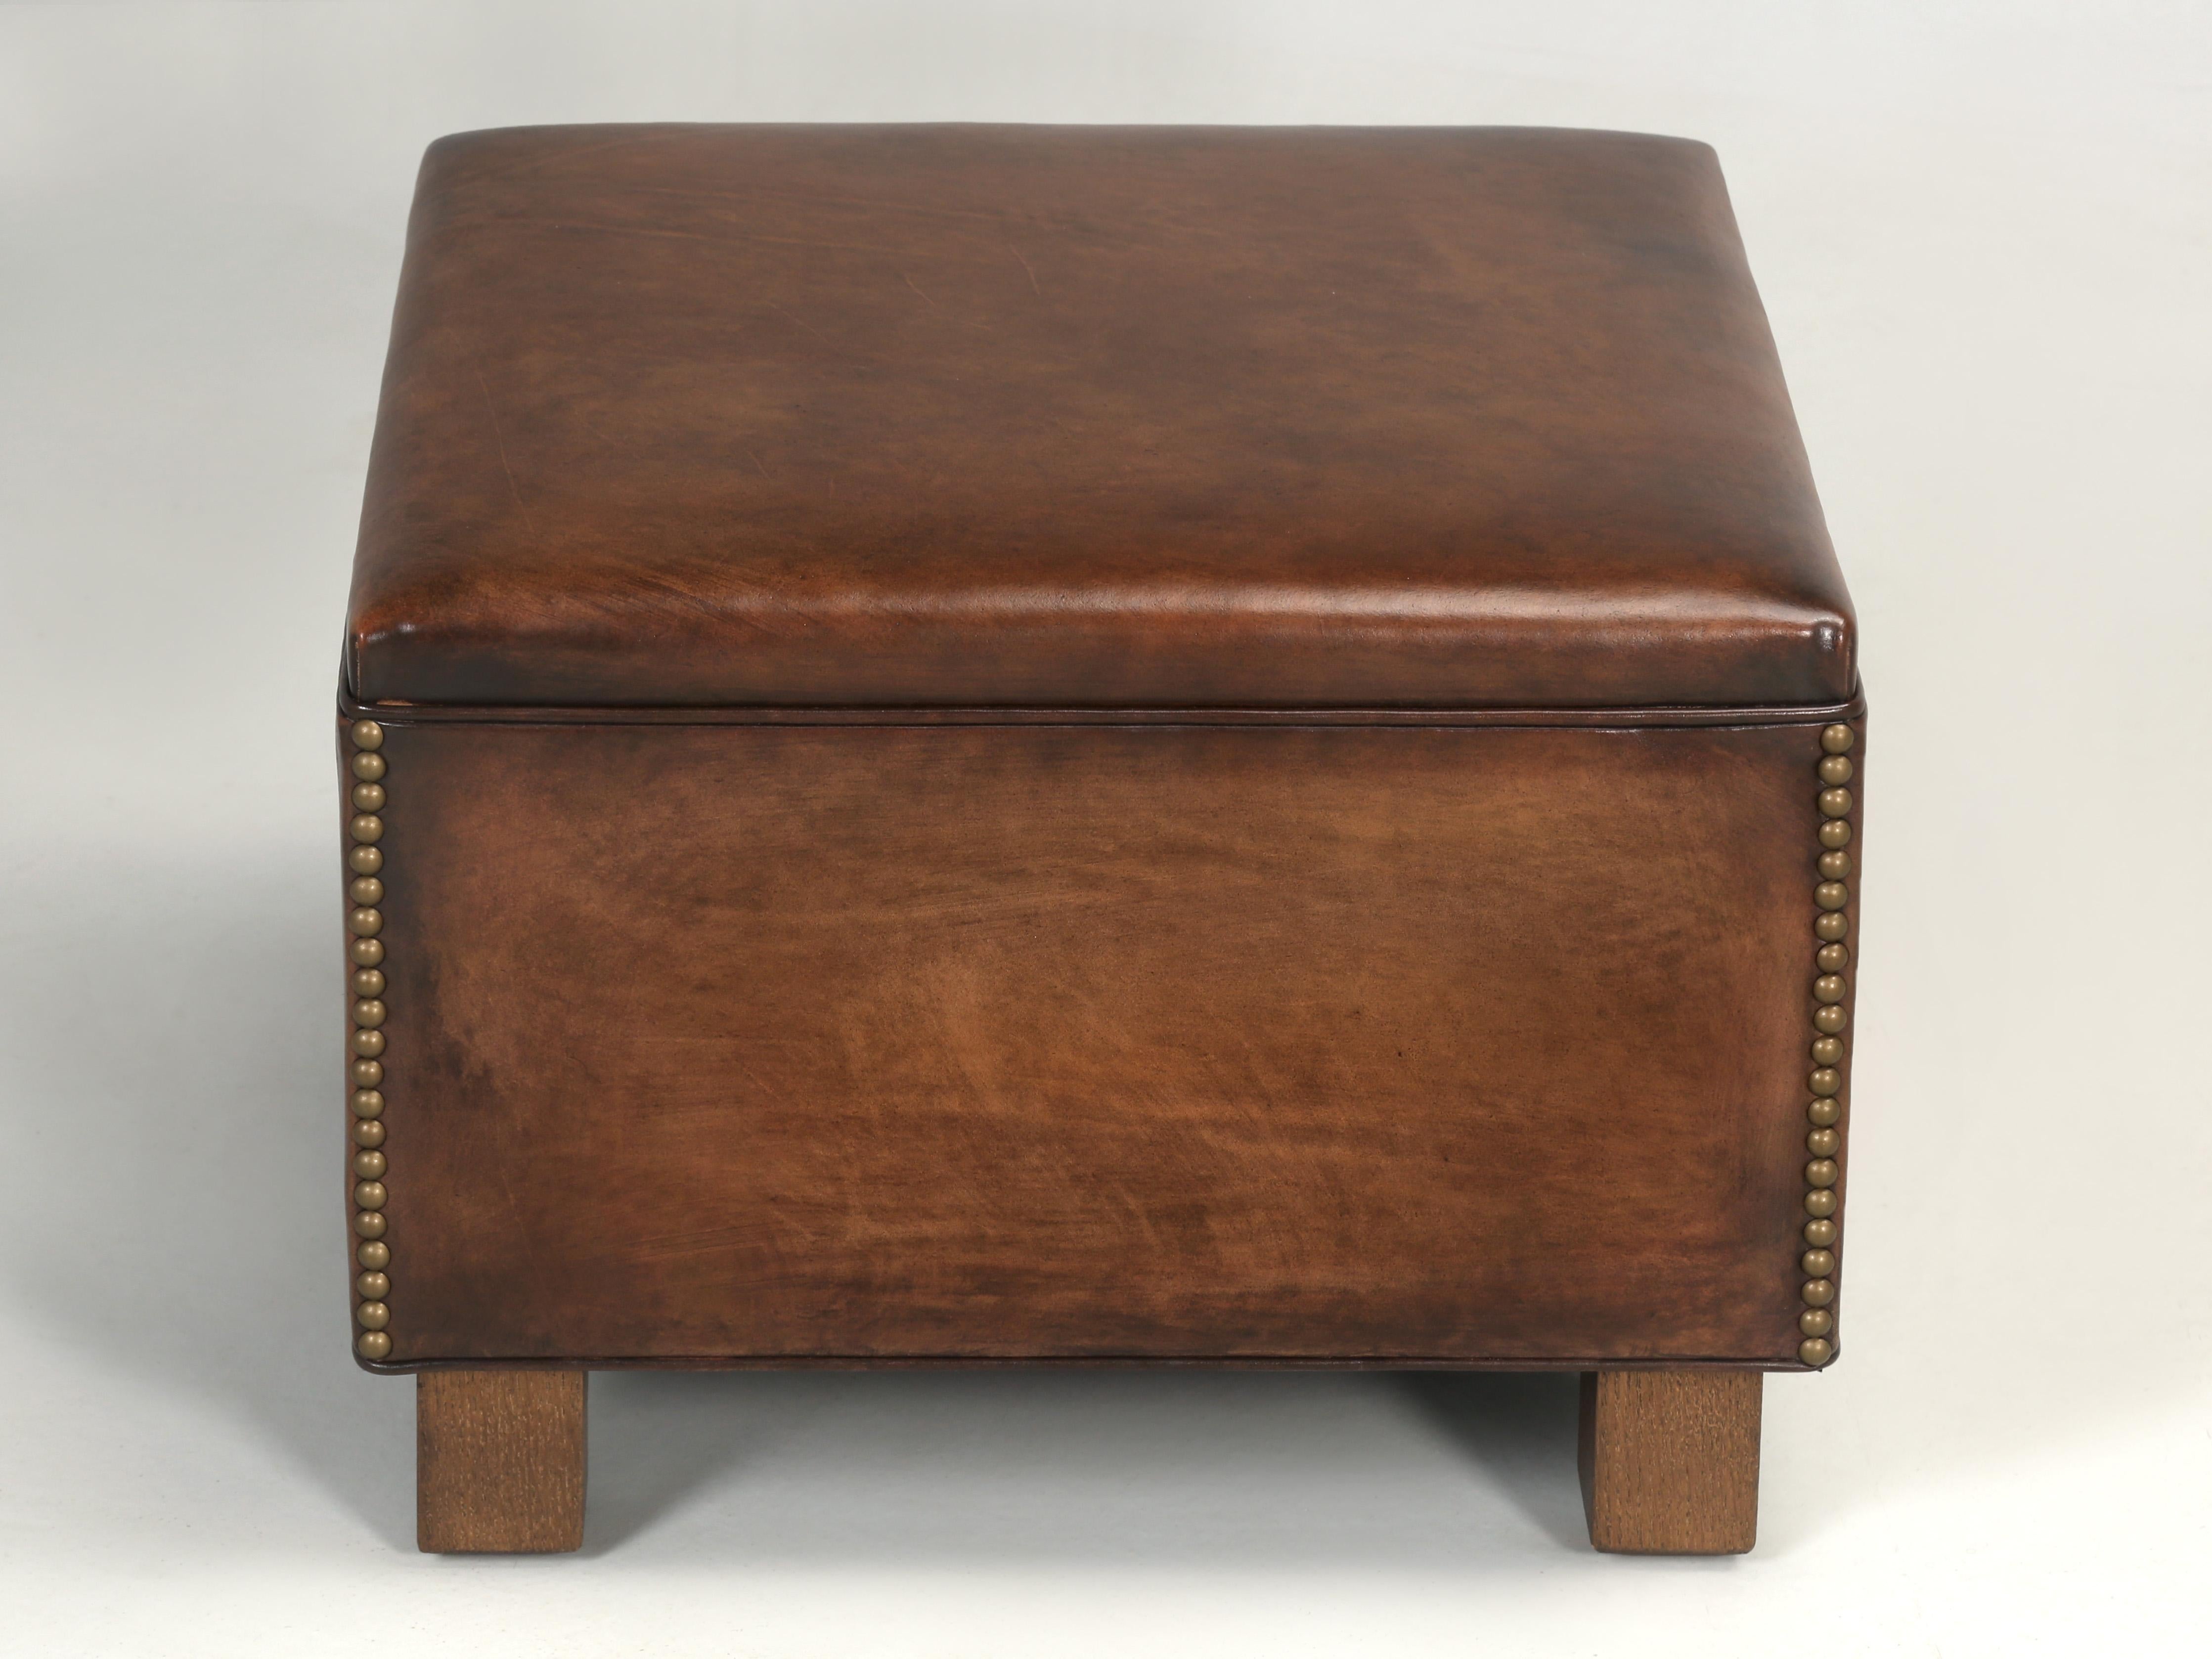 American French Art Deco Club Chair Stool or Ottoman in Aged Patina Available in Any Size For Sale